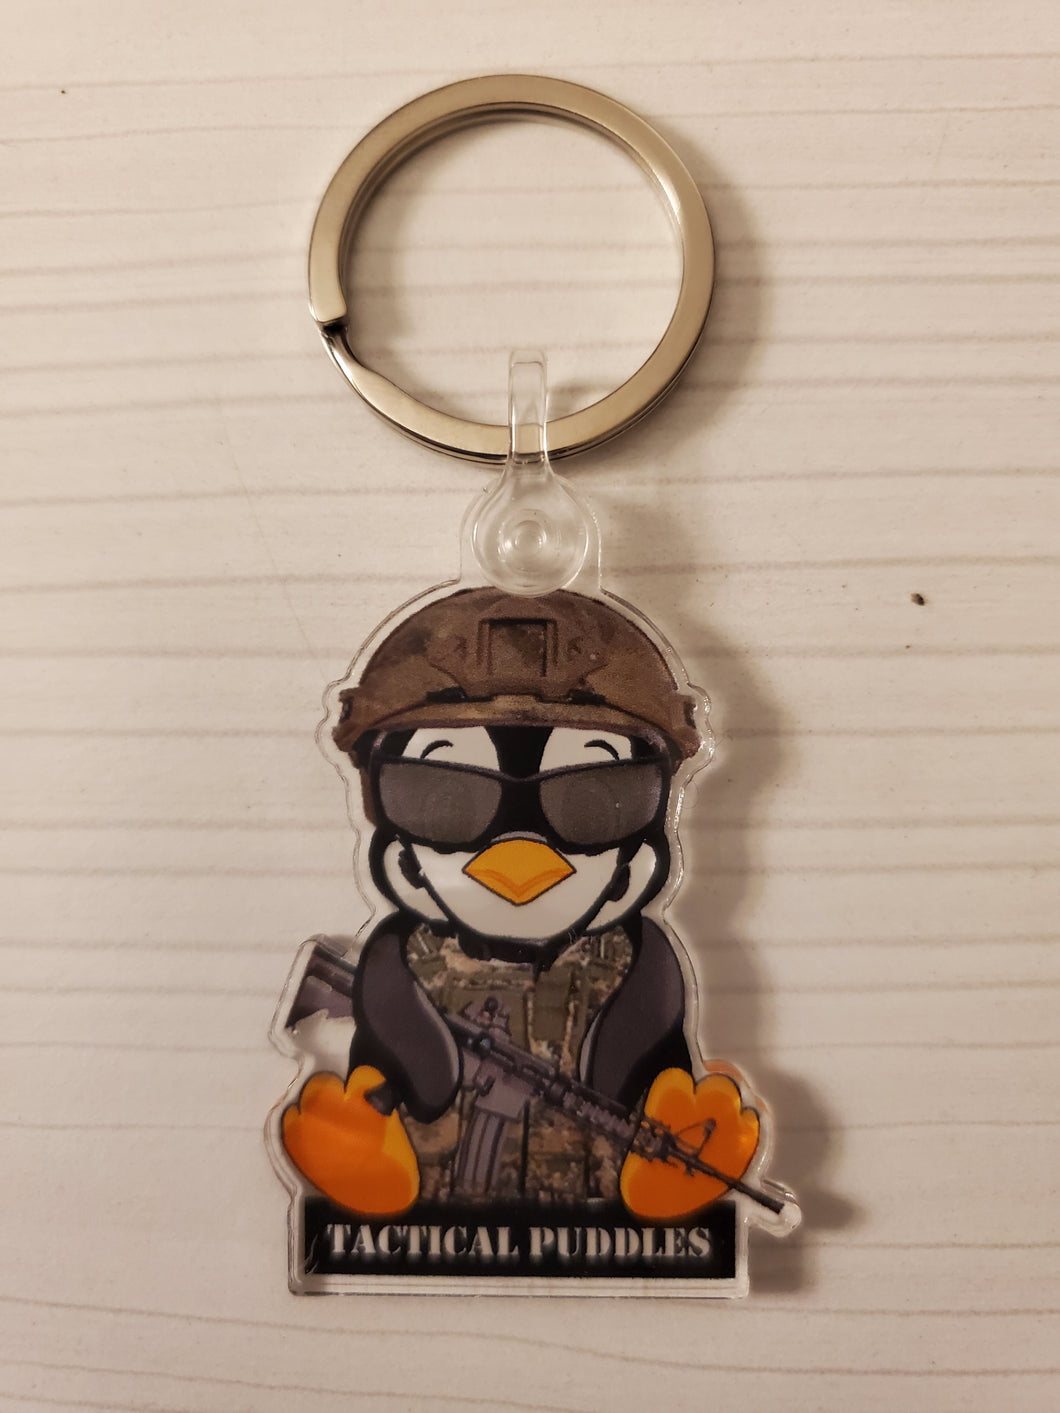 Tactical Puddles Keychain